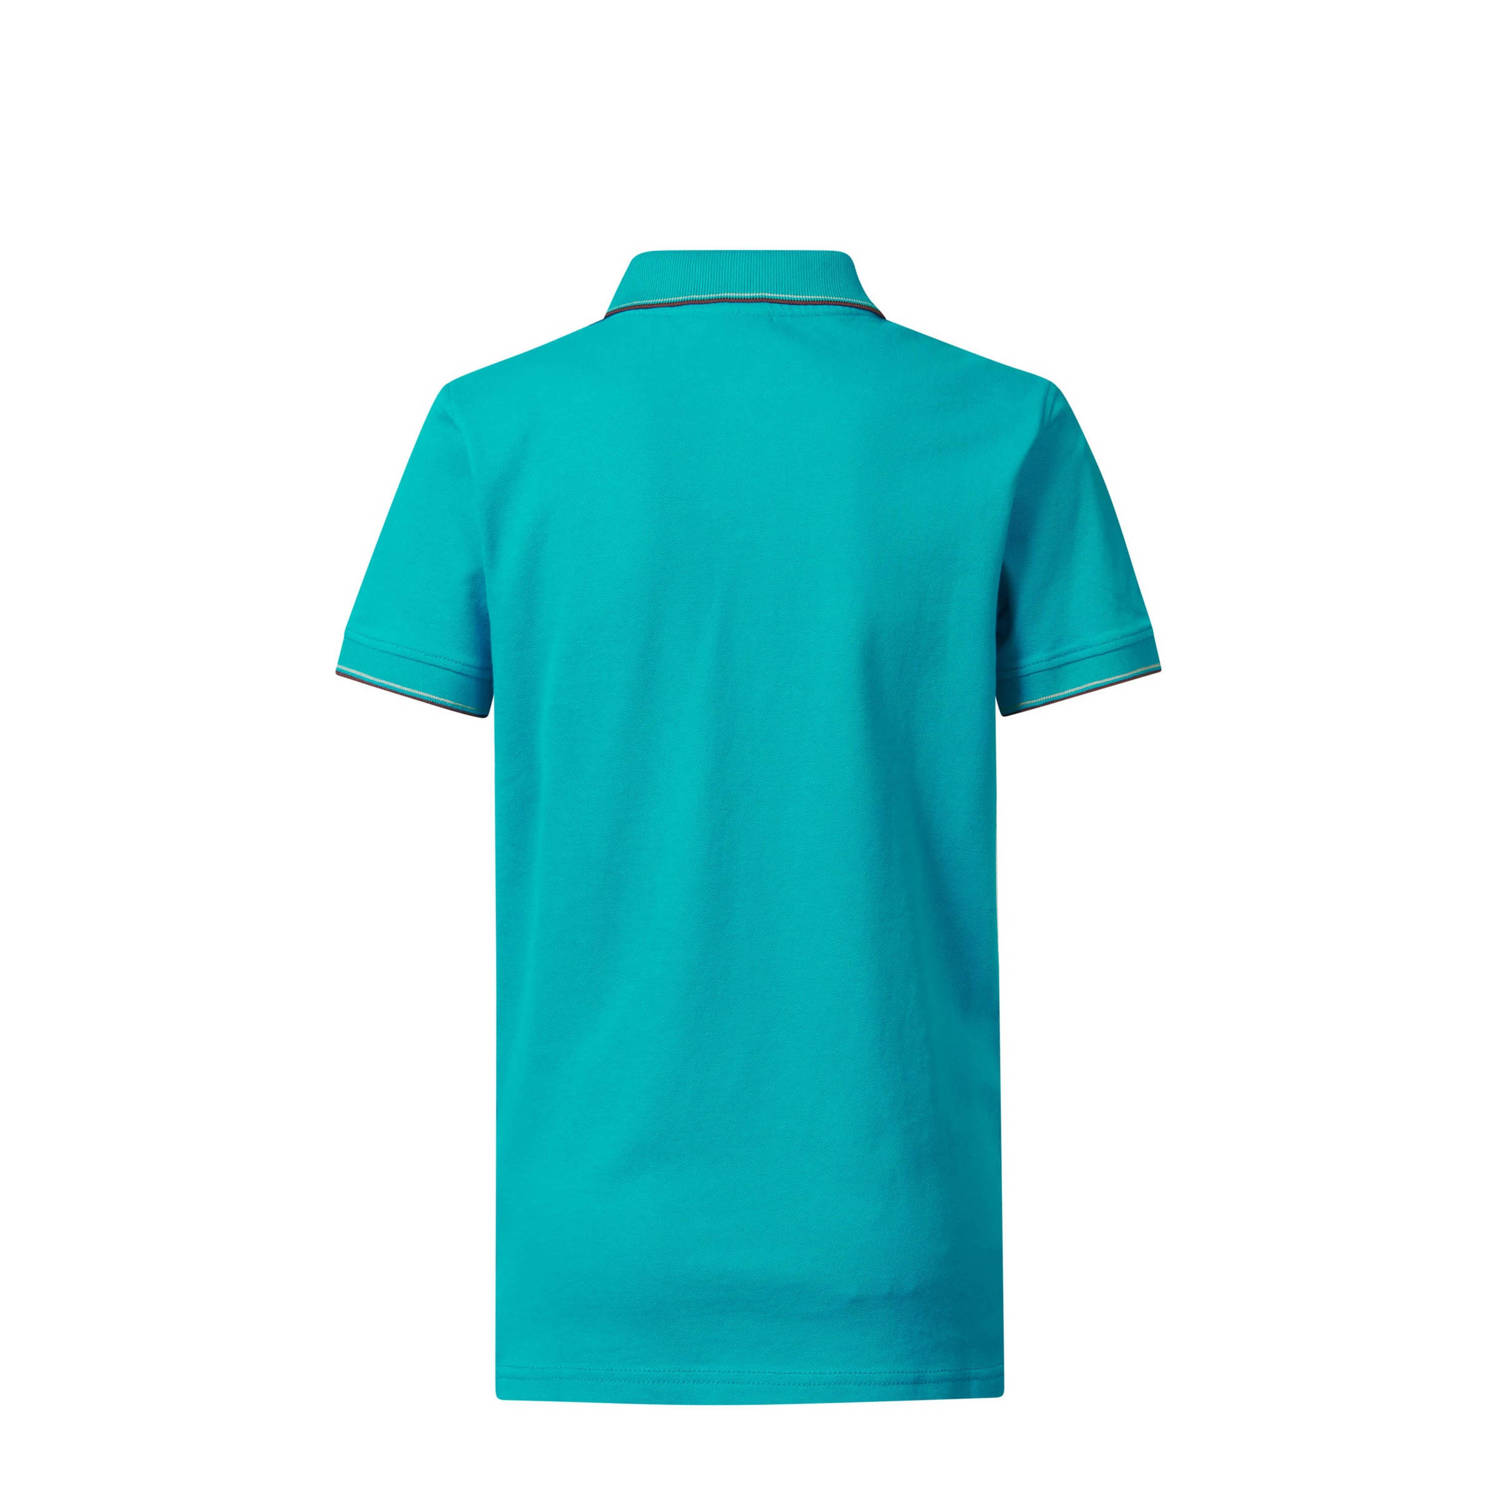 Petrol Industries polo turquoise